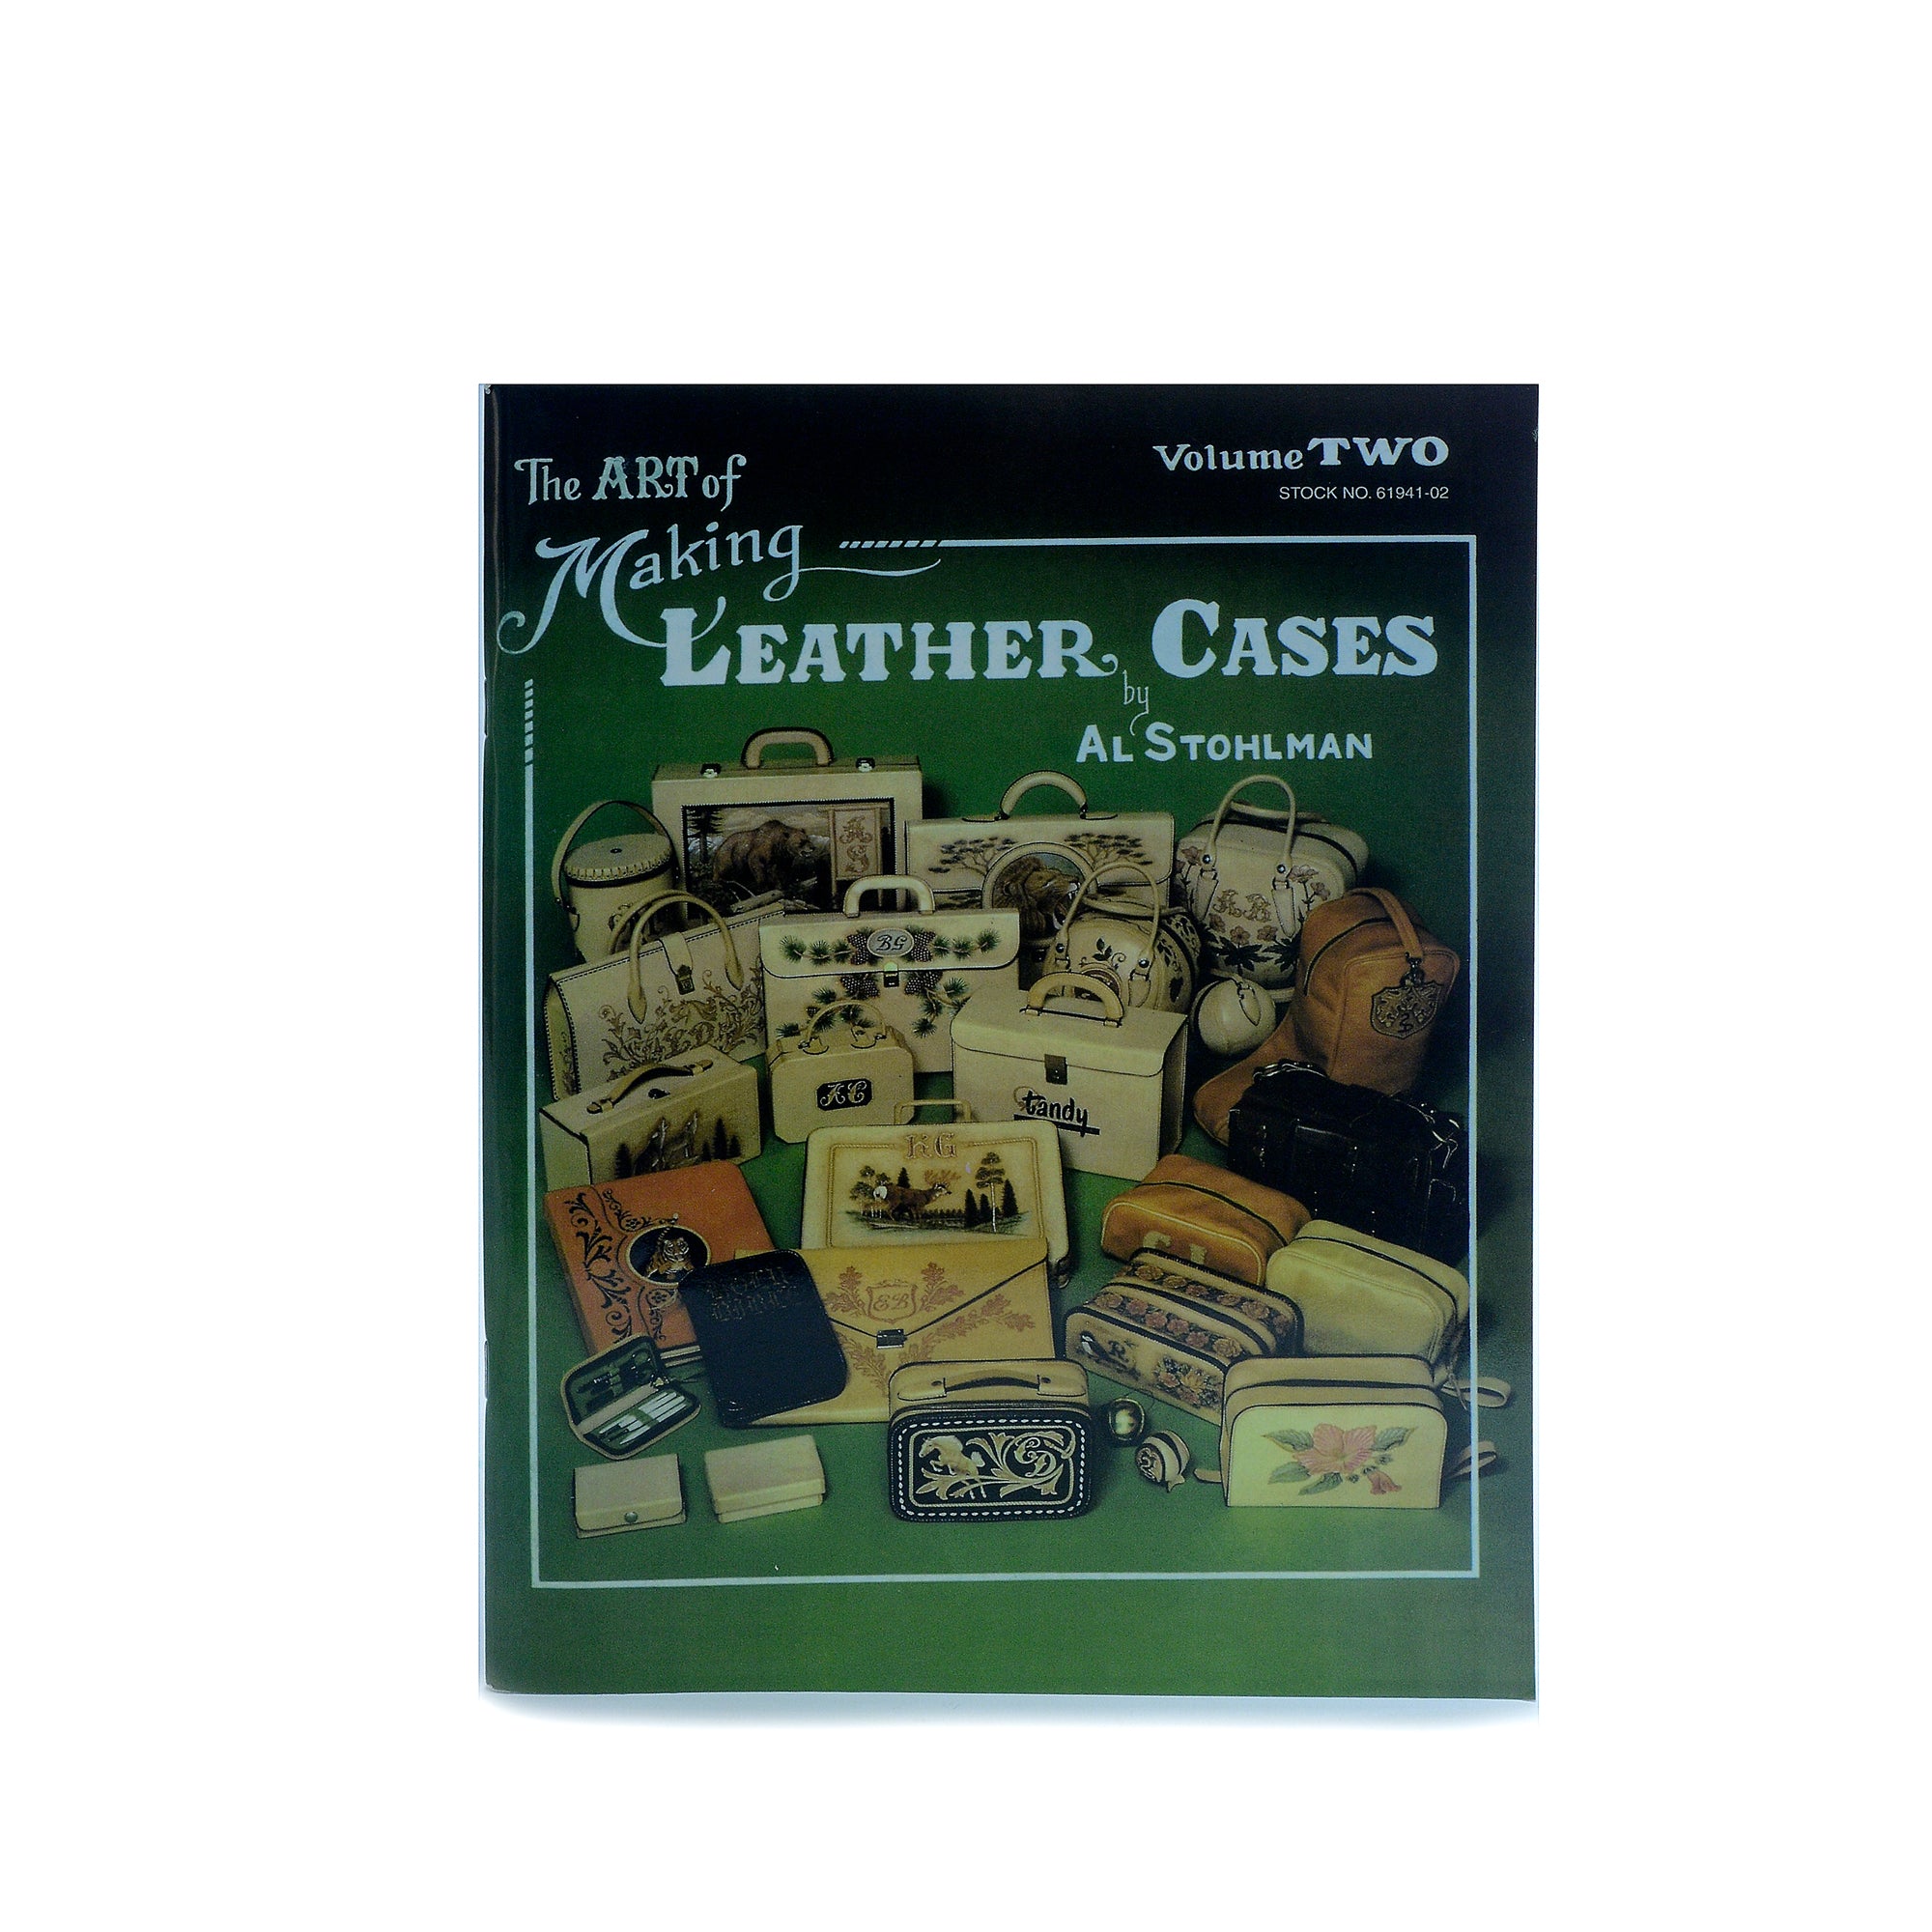 The Art of Making Leather Cases by Al Stohlman - Volume 2 from Identity Leathercraft